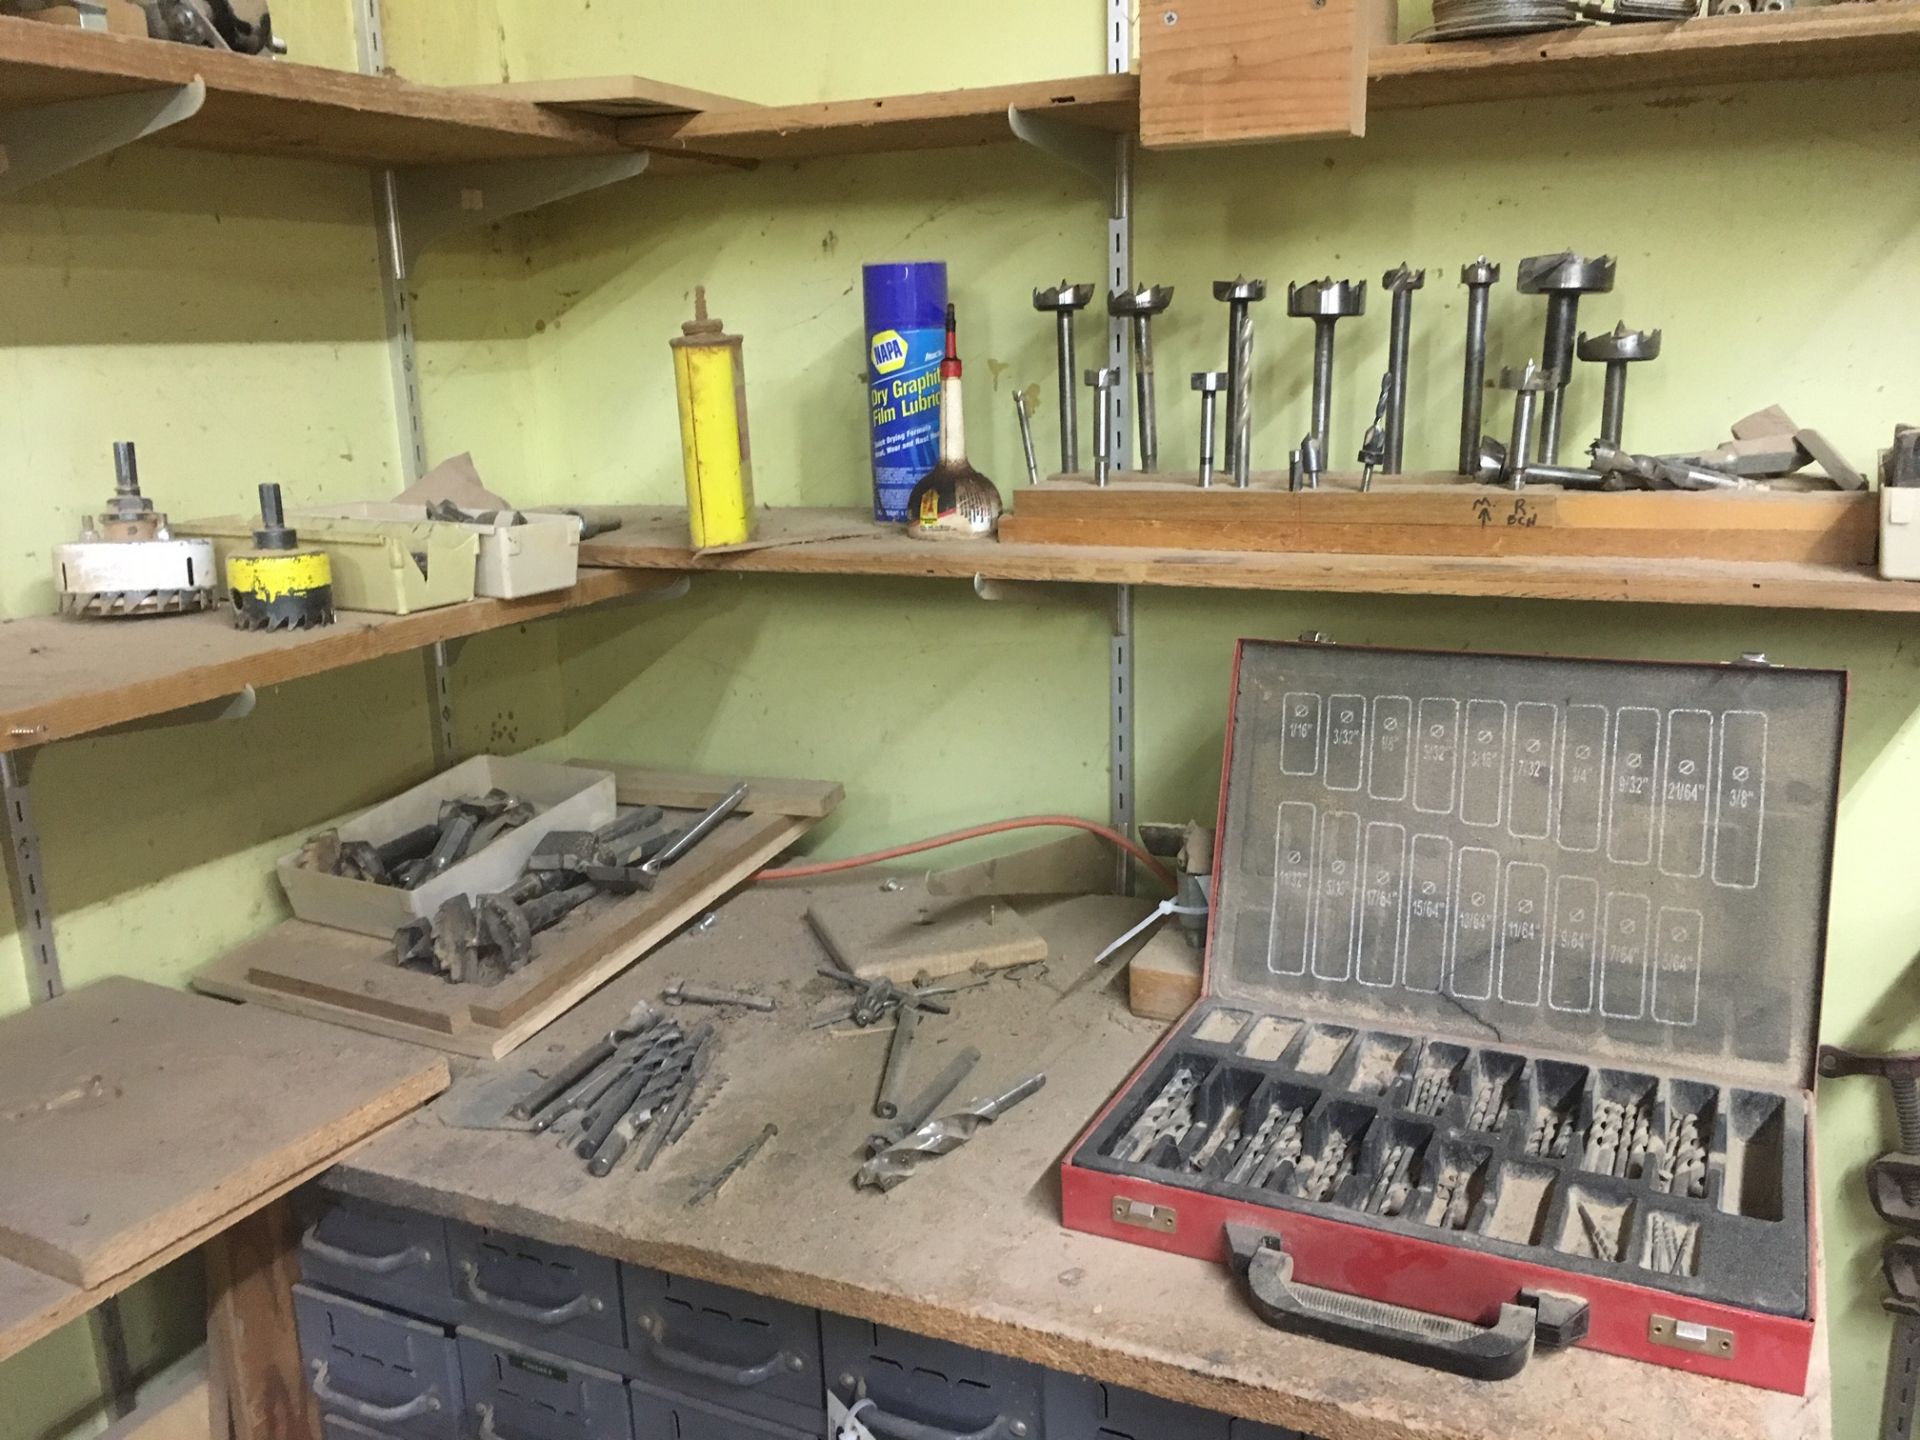 Assorted Drill Bits, Forstner bits etc. on table